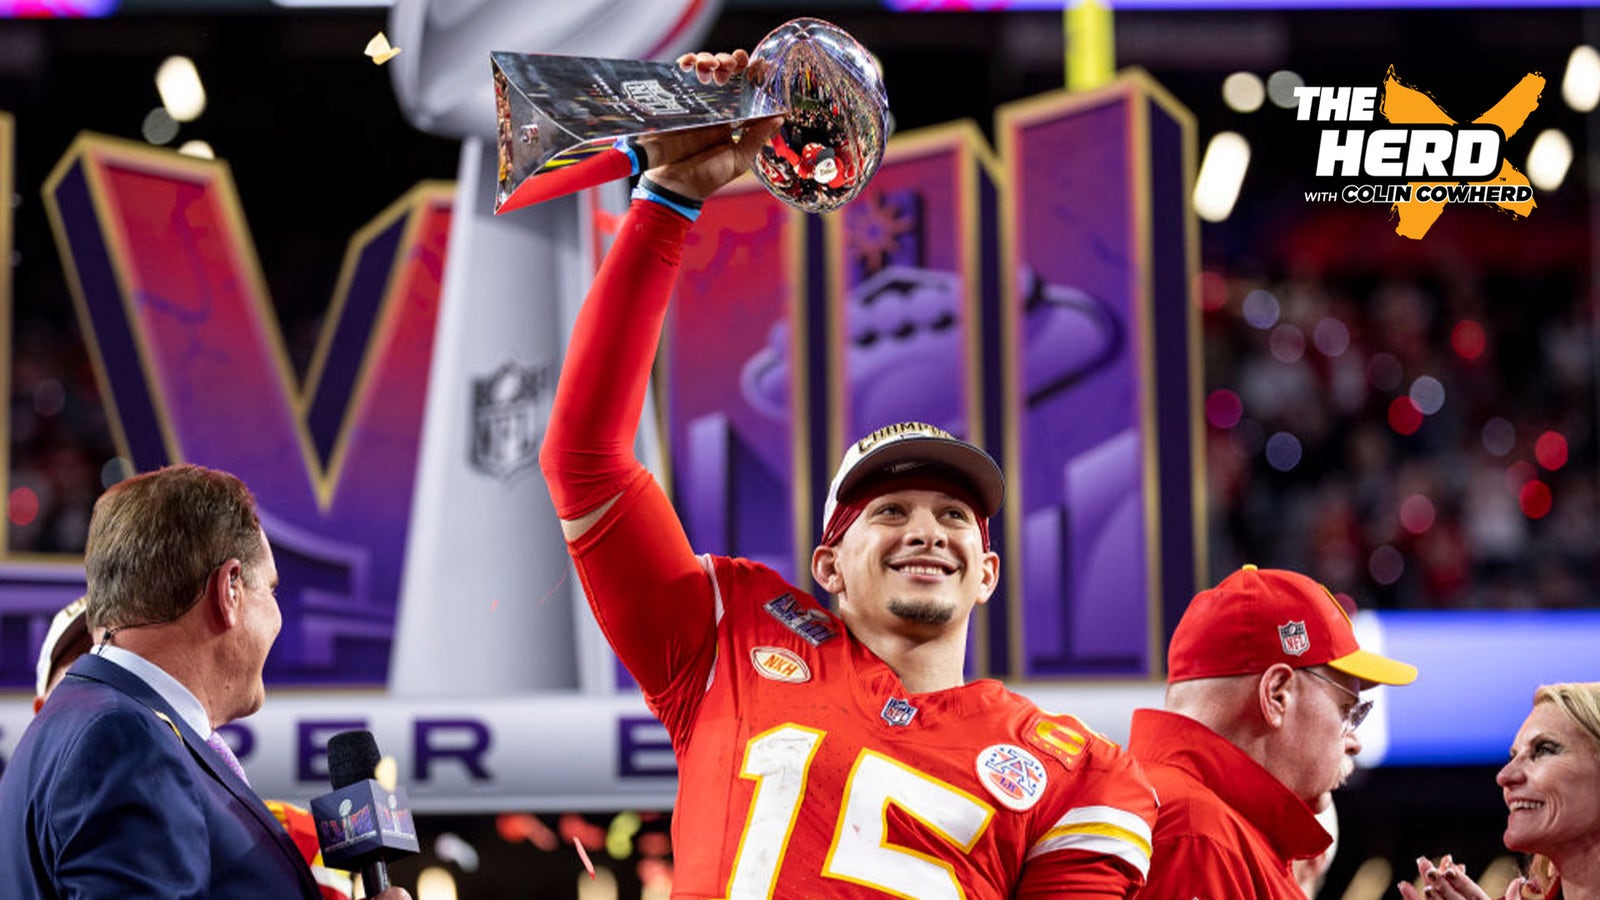 Why NFL should feel discouraged about Patrick Mahomes' SBLVIII win